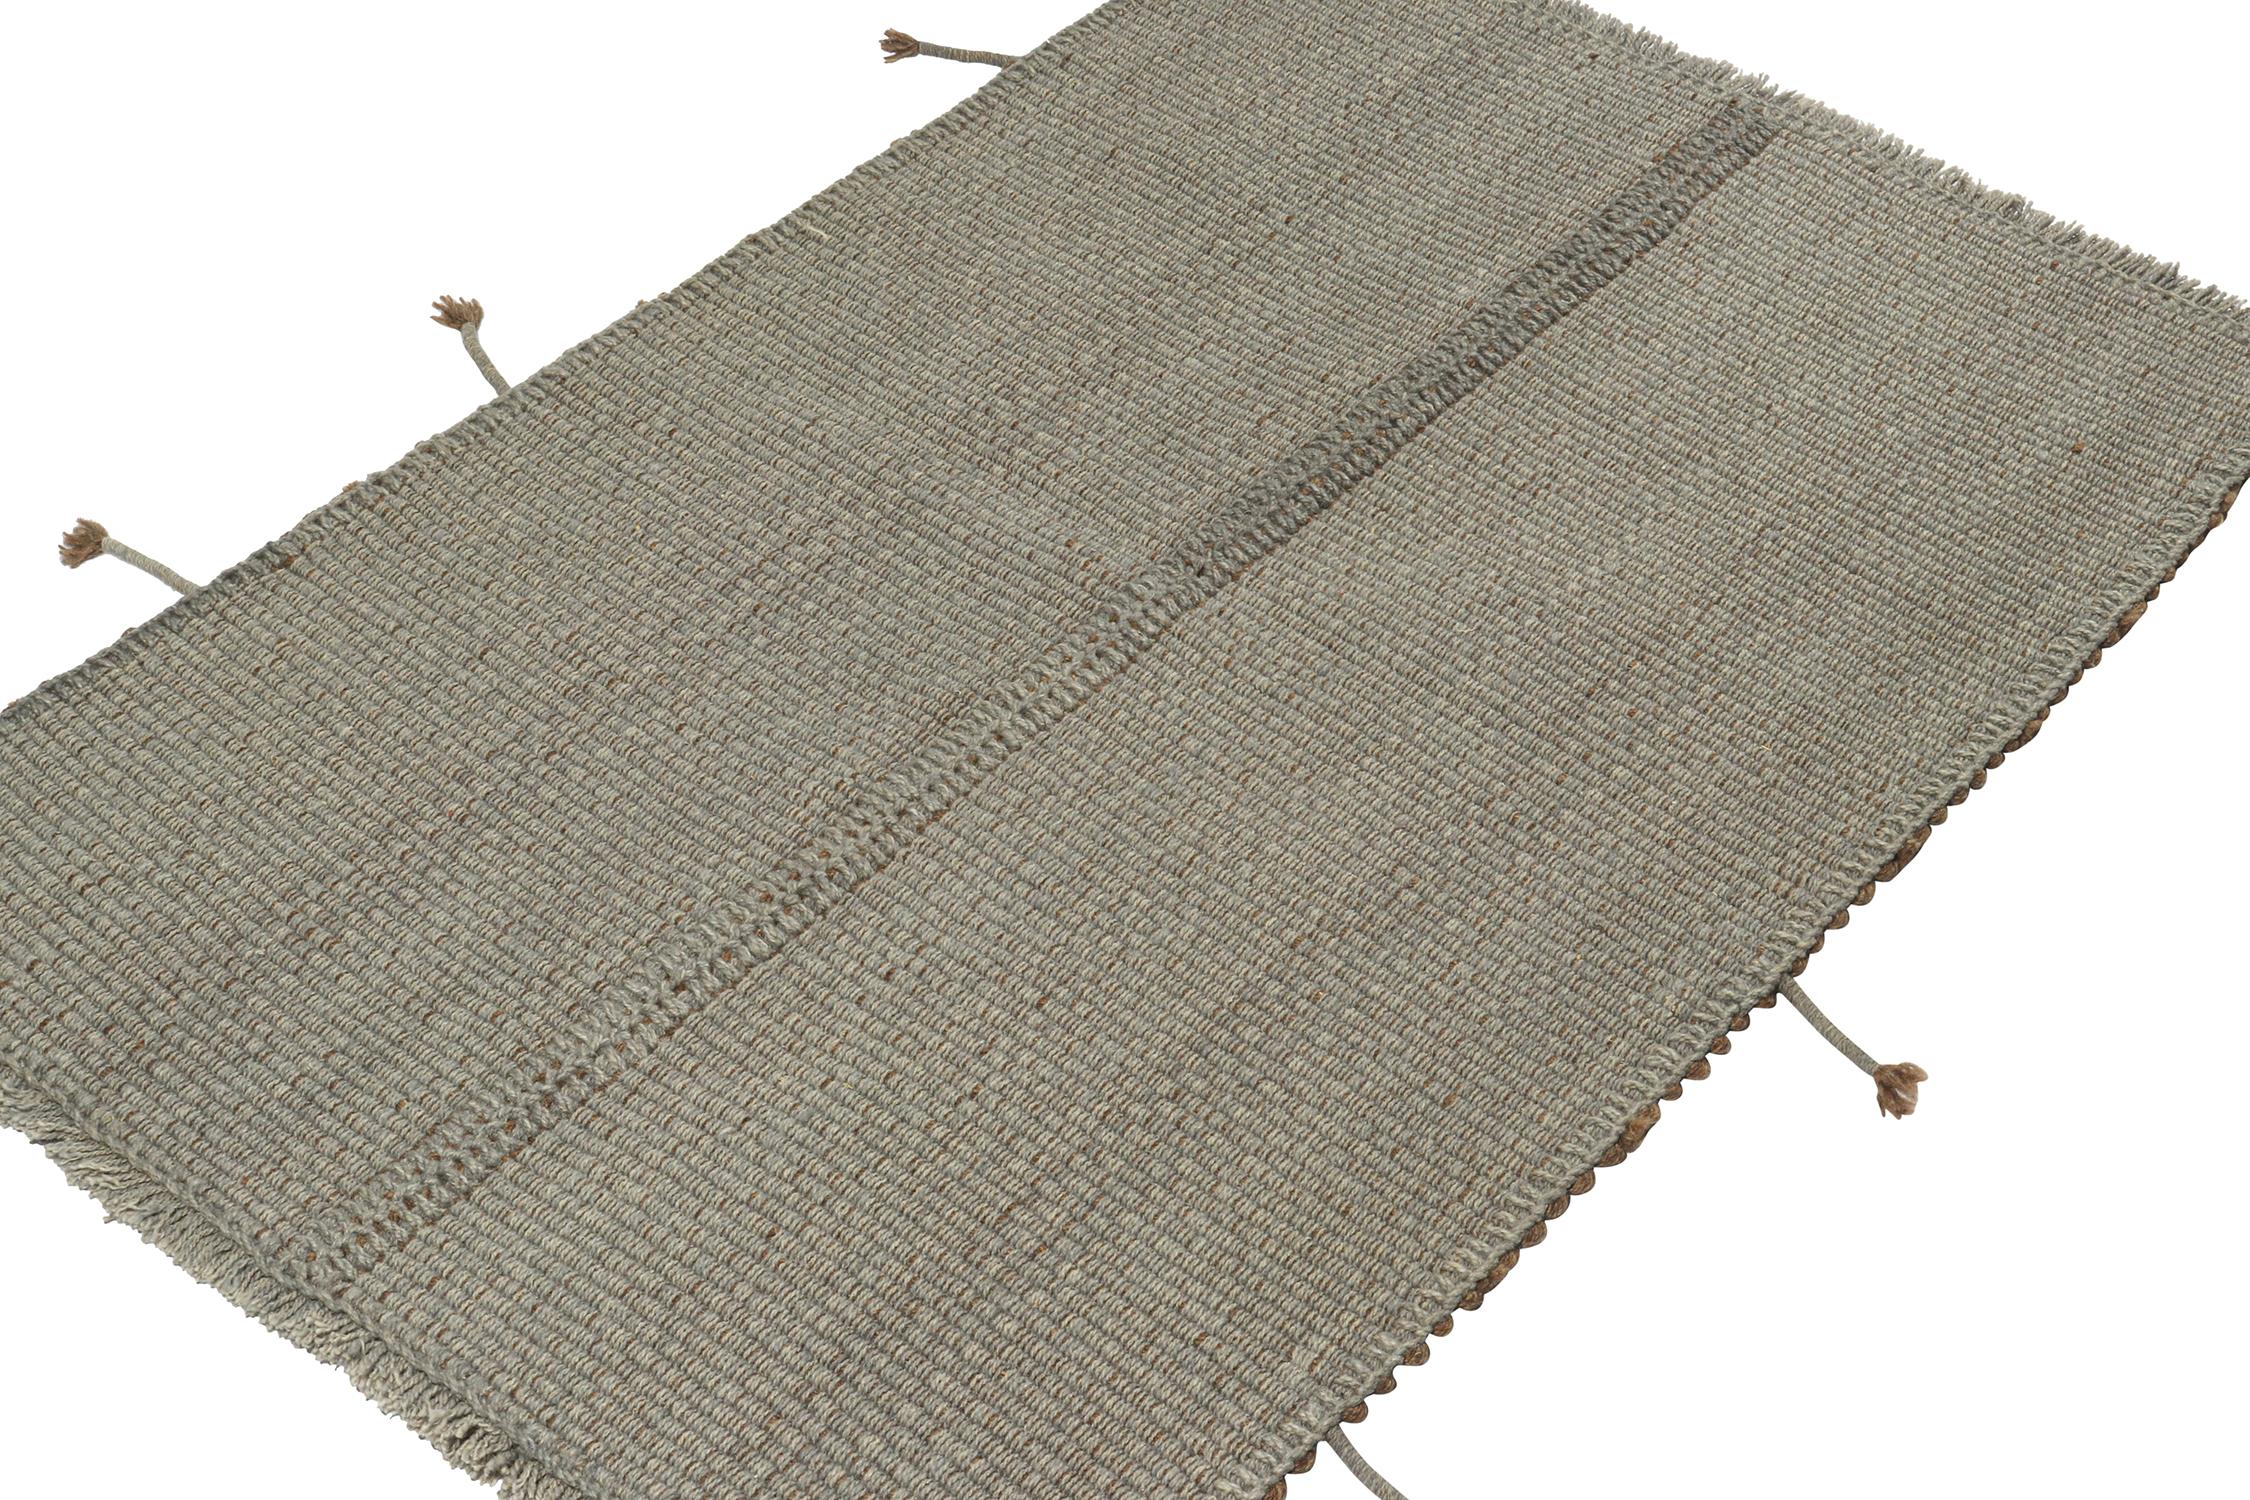 Handwoven in wool, a 3x4 Kilim from a bold, artisan line of contemporary flatweaves by Rug & Kilim.


On the Design:

This “Rez Kilim” piece enjoys a more durable take on classic panel-woven style in handsome gray hues with brown accents. Subtle